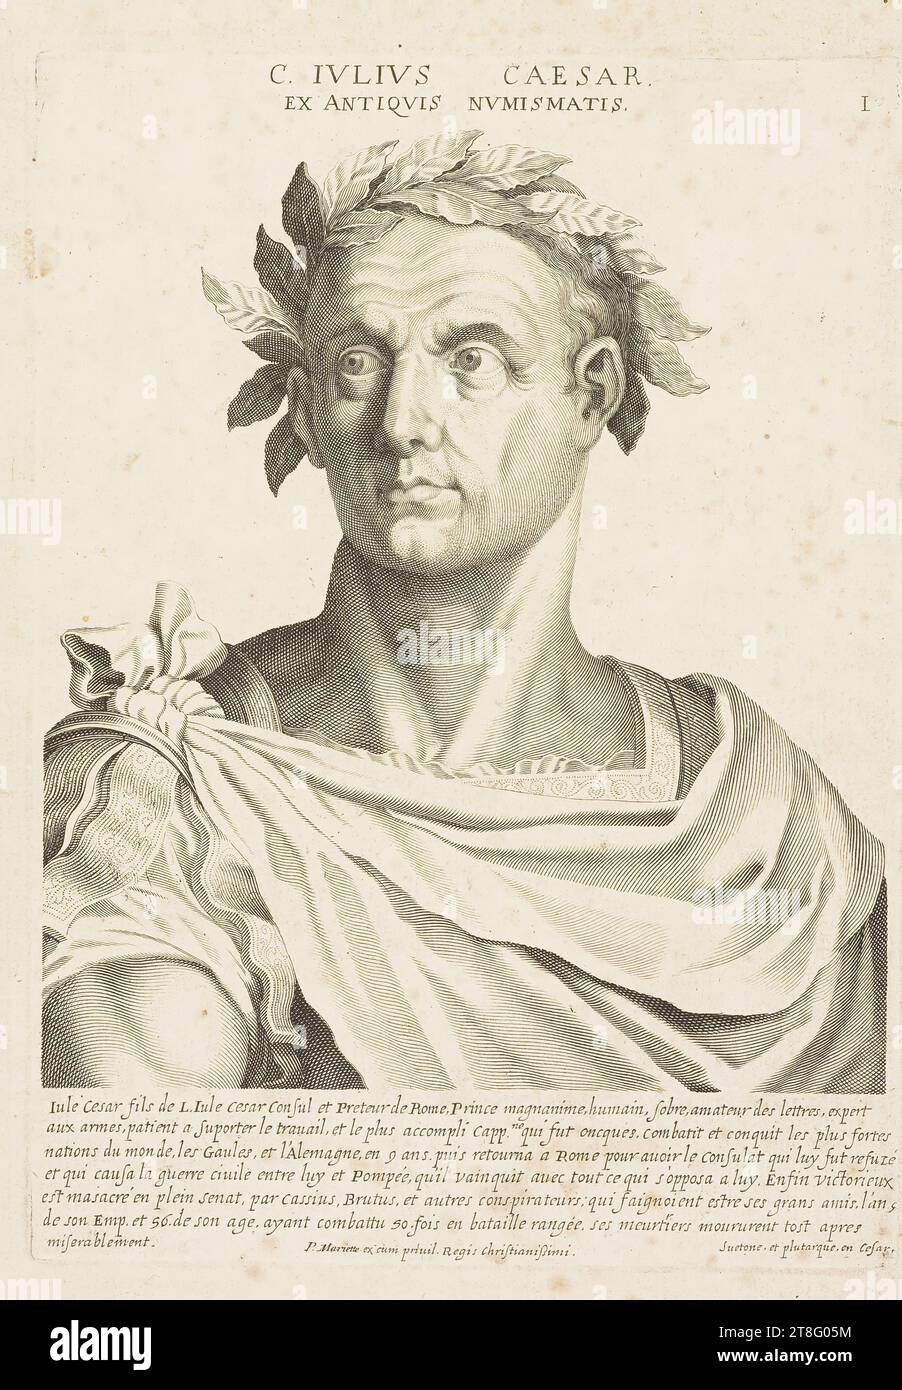 C. IVLIVS CAESAR, EX ANTIQVIS NVMISMATIS. I. Iule Cesar son of L.Iule Cesar Consul and Praetor of Rome, n Prince magnanimous, humane, sober, lover of letters, expert, in arms, patient in supporting work, and the most accomplished Cappne. who was once, fought and conquered the strongest, nations of the min of Gaul and Germany, in 9 years. then returned to Rome to have the Consulate which was refused to him, and which caused the civil war between him and Pompey, which he vanquished with all that opposed him. Finally victorious, is massacred in full senate, by Cassius, Brutus Stock Photo